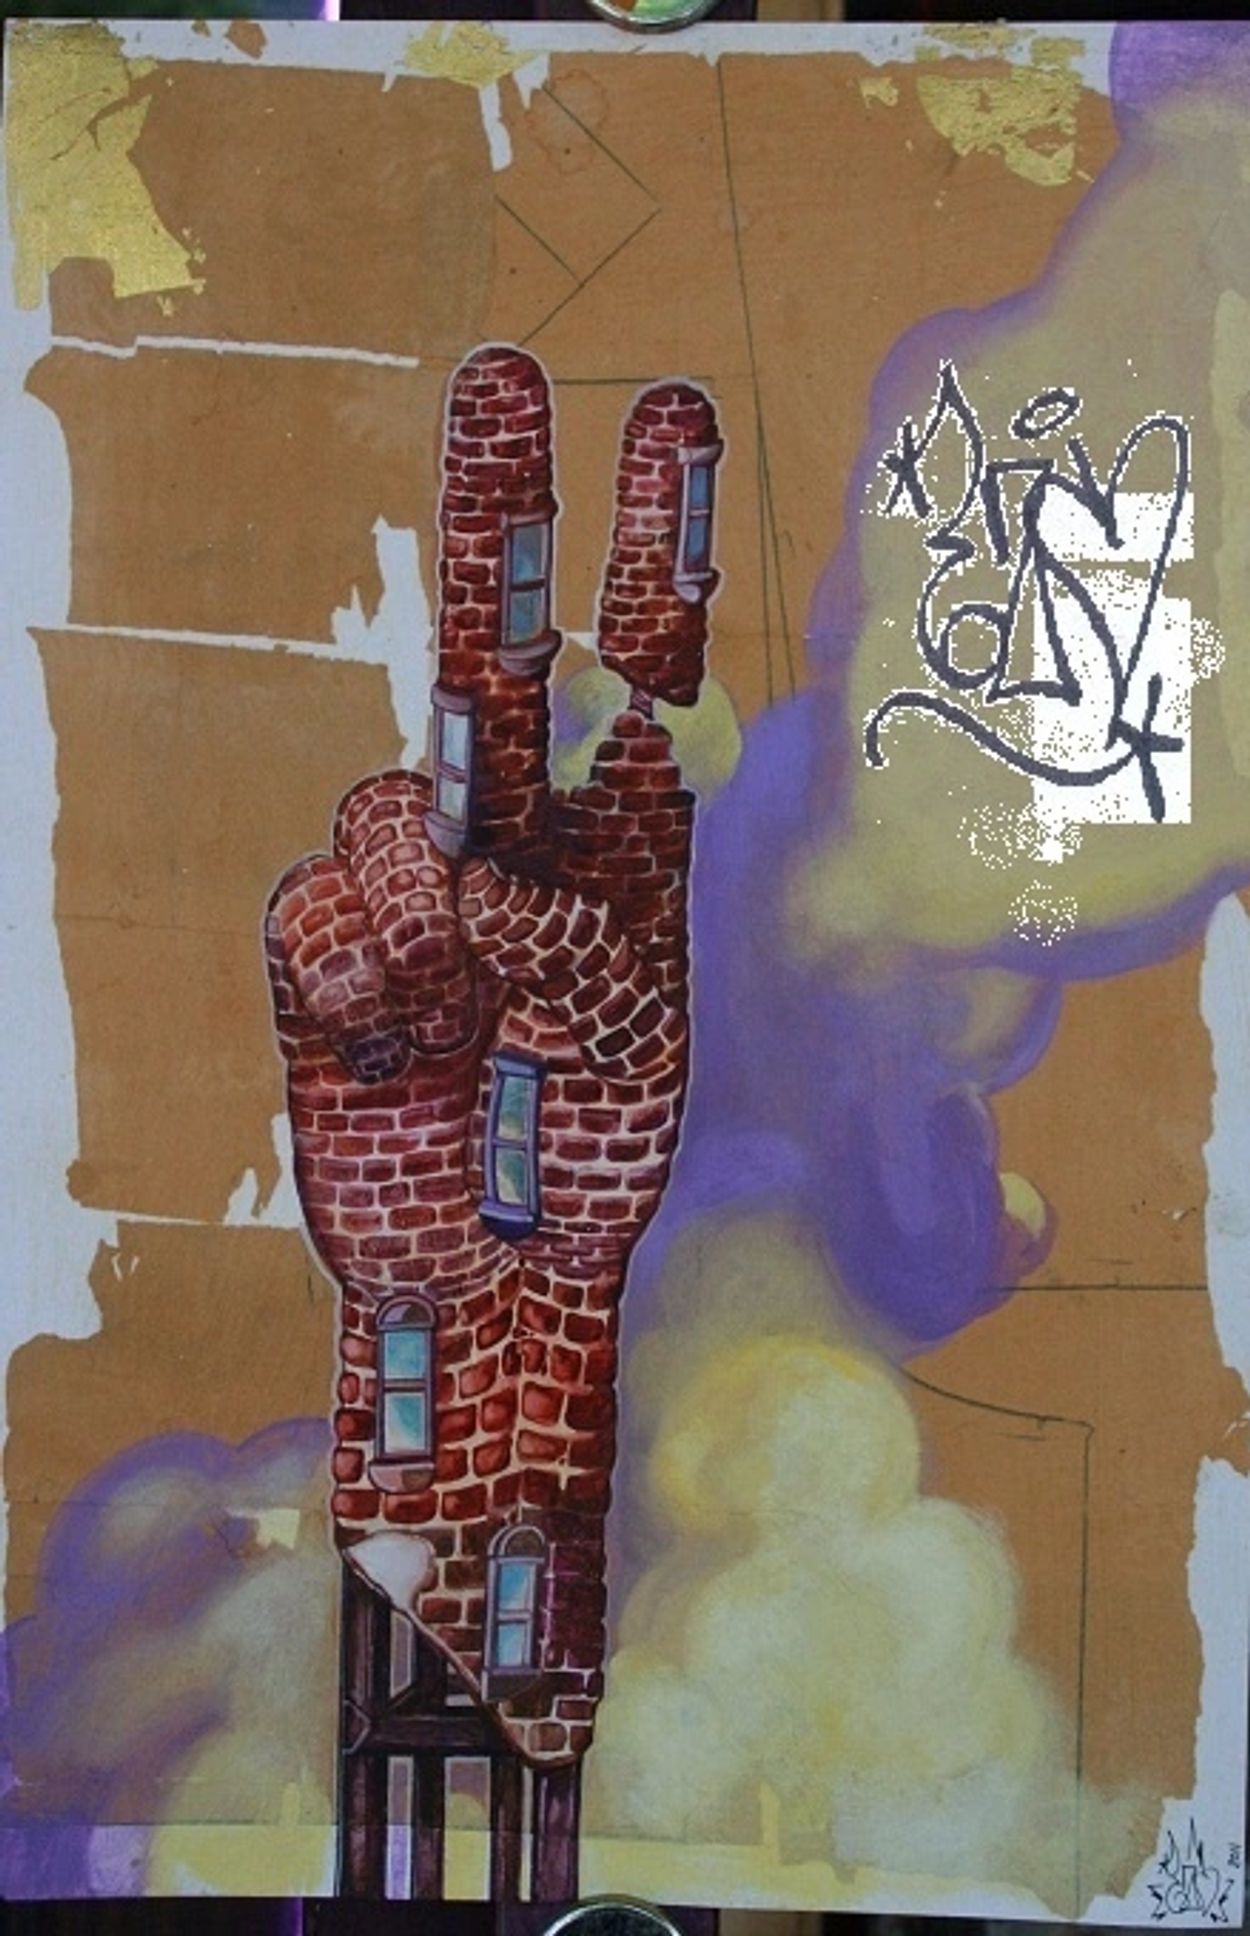  A 30 x 40  poster on glossy paper, hand signed and customized, The  Brick hand by Ezo Wippler.